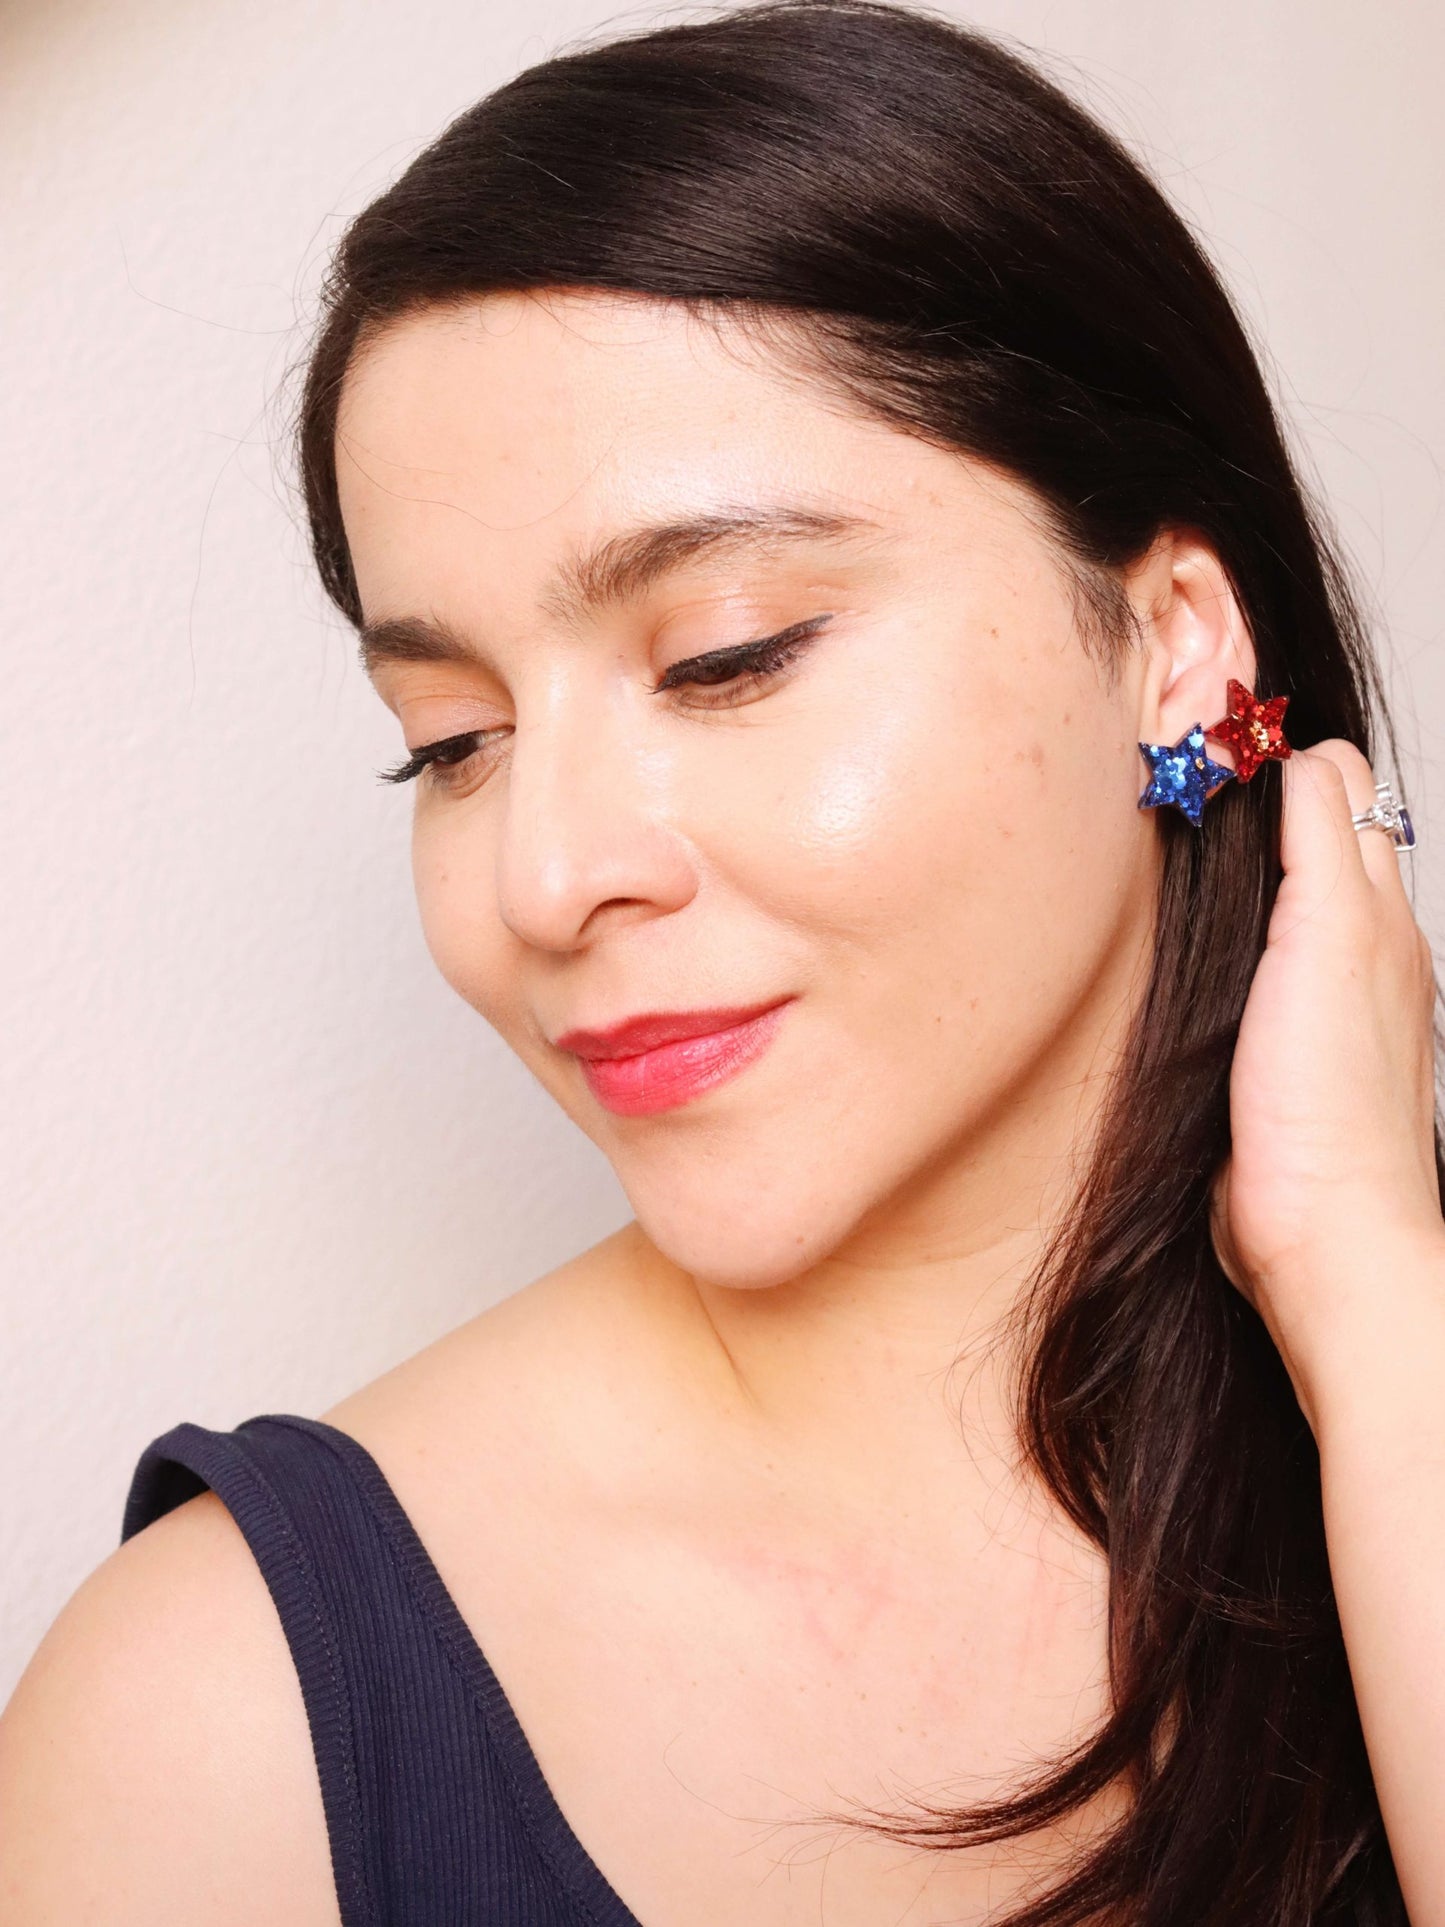 patriotic-star-stud-earrings---patriotic-star-stud-earrings---red-white-and-blue-jewelry---kaleidoscopes-and-polka-dots